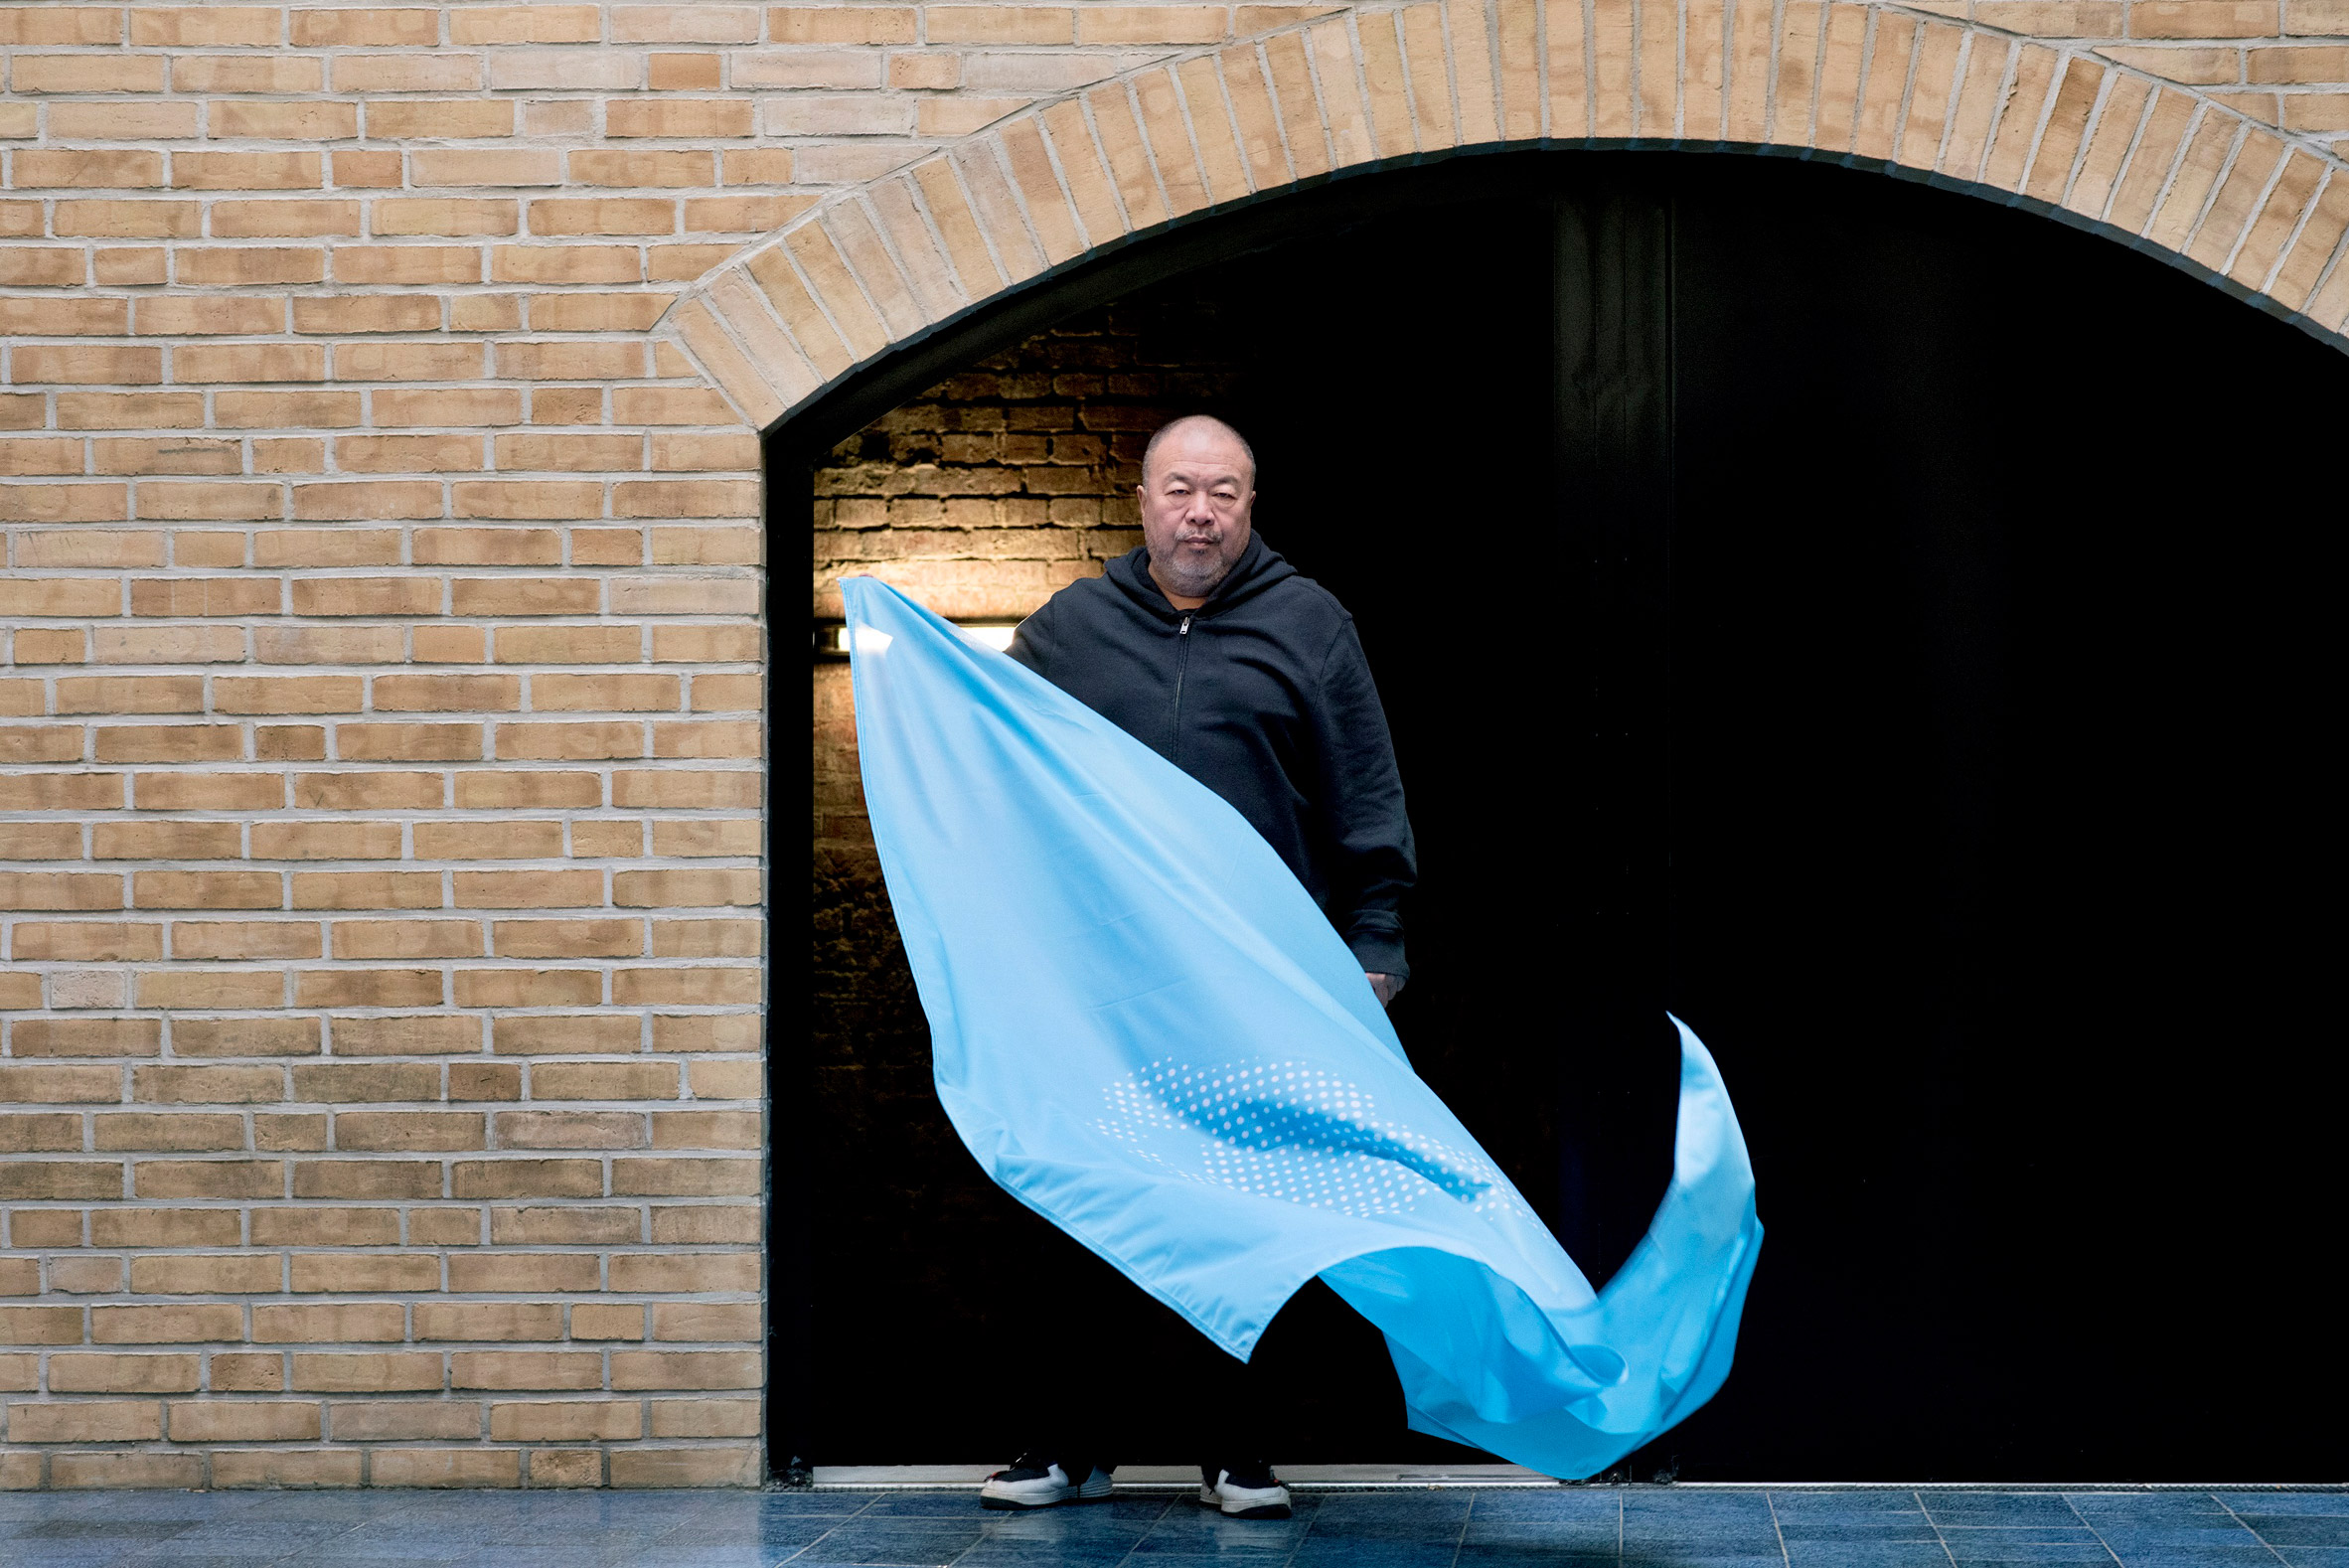 Ai Weiwei designs footprint flag as a symbol for human rights